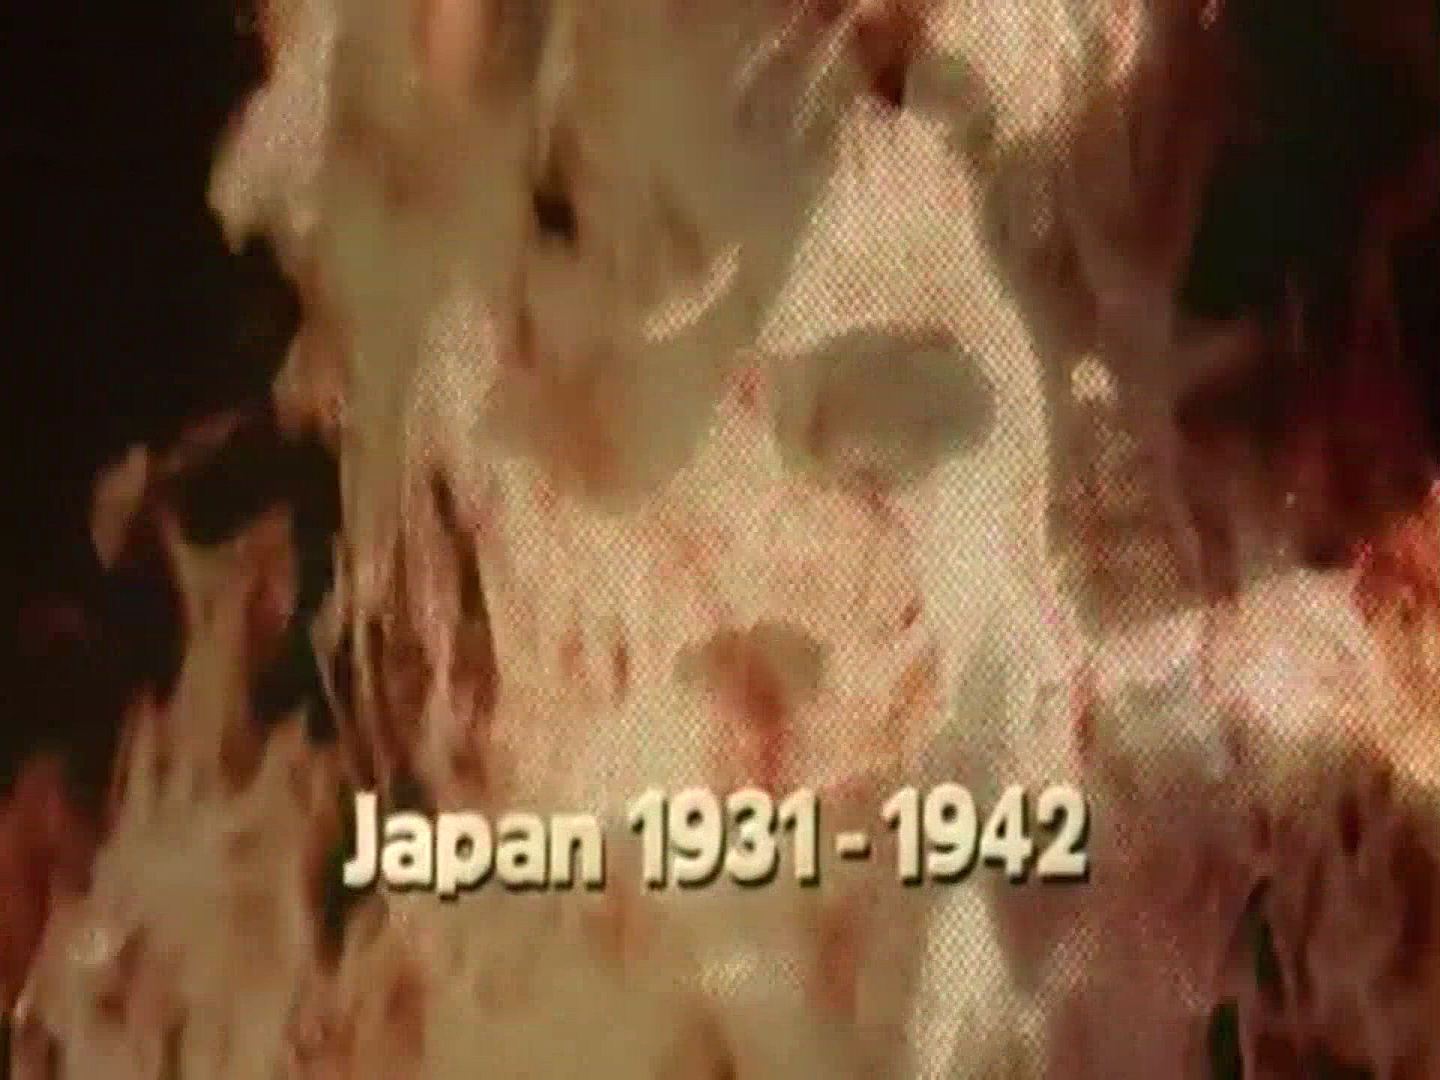 Main title from the 1973 ‘Banzai!’ episode of The World at War (1973-74) (2). Japan 1931-1942